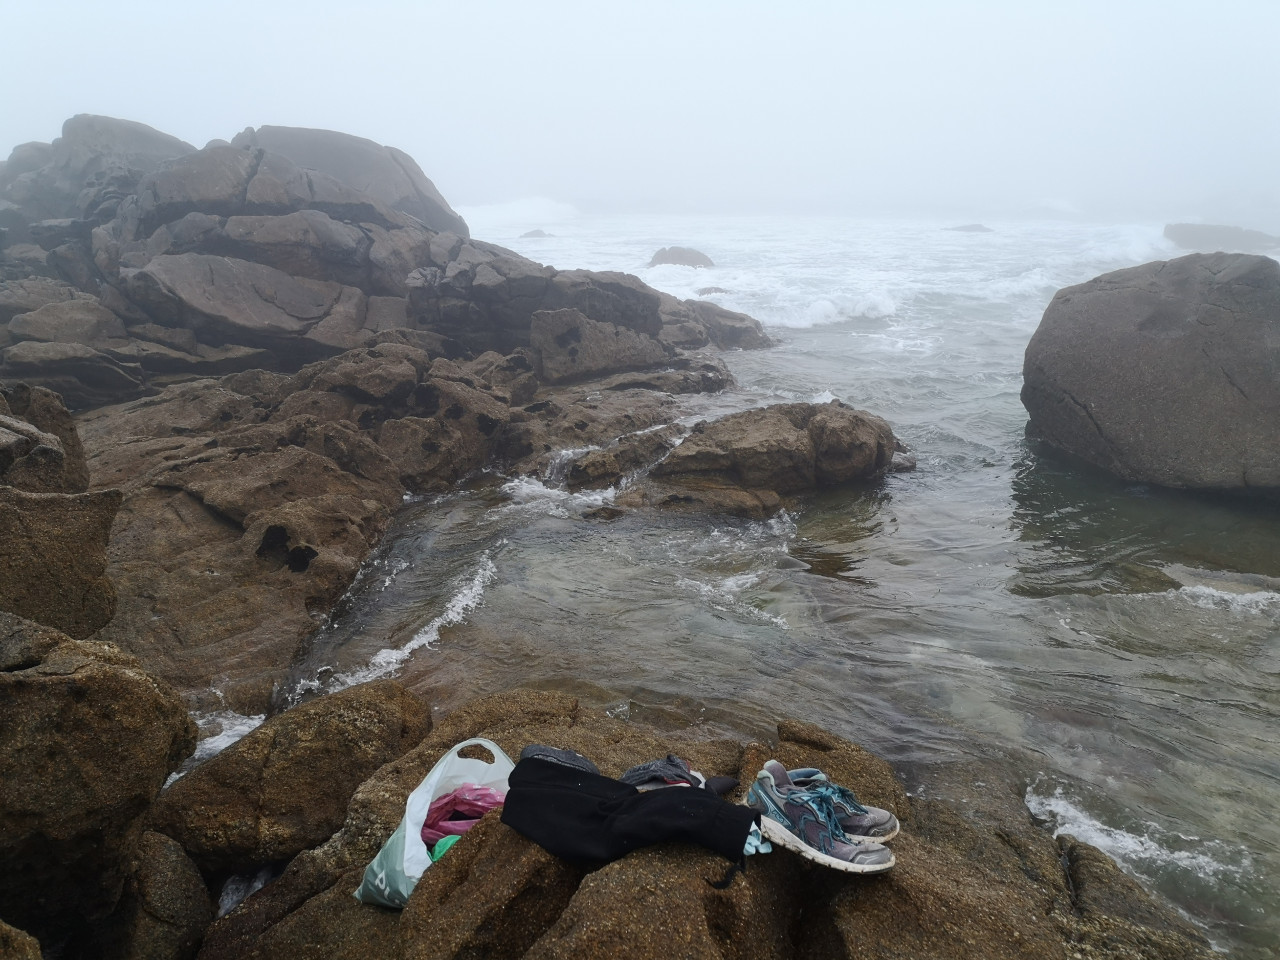 Mermaid Cove in the fog, ready for the immersion.